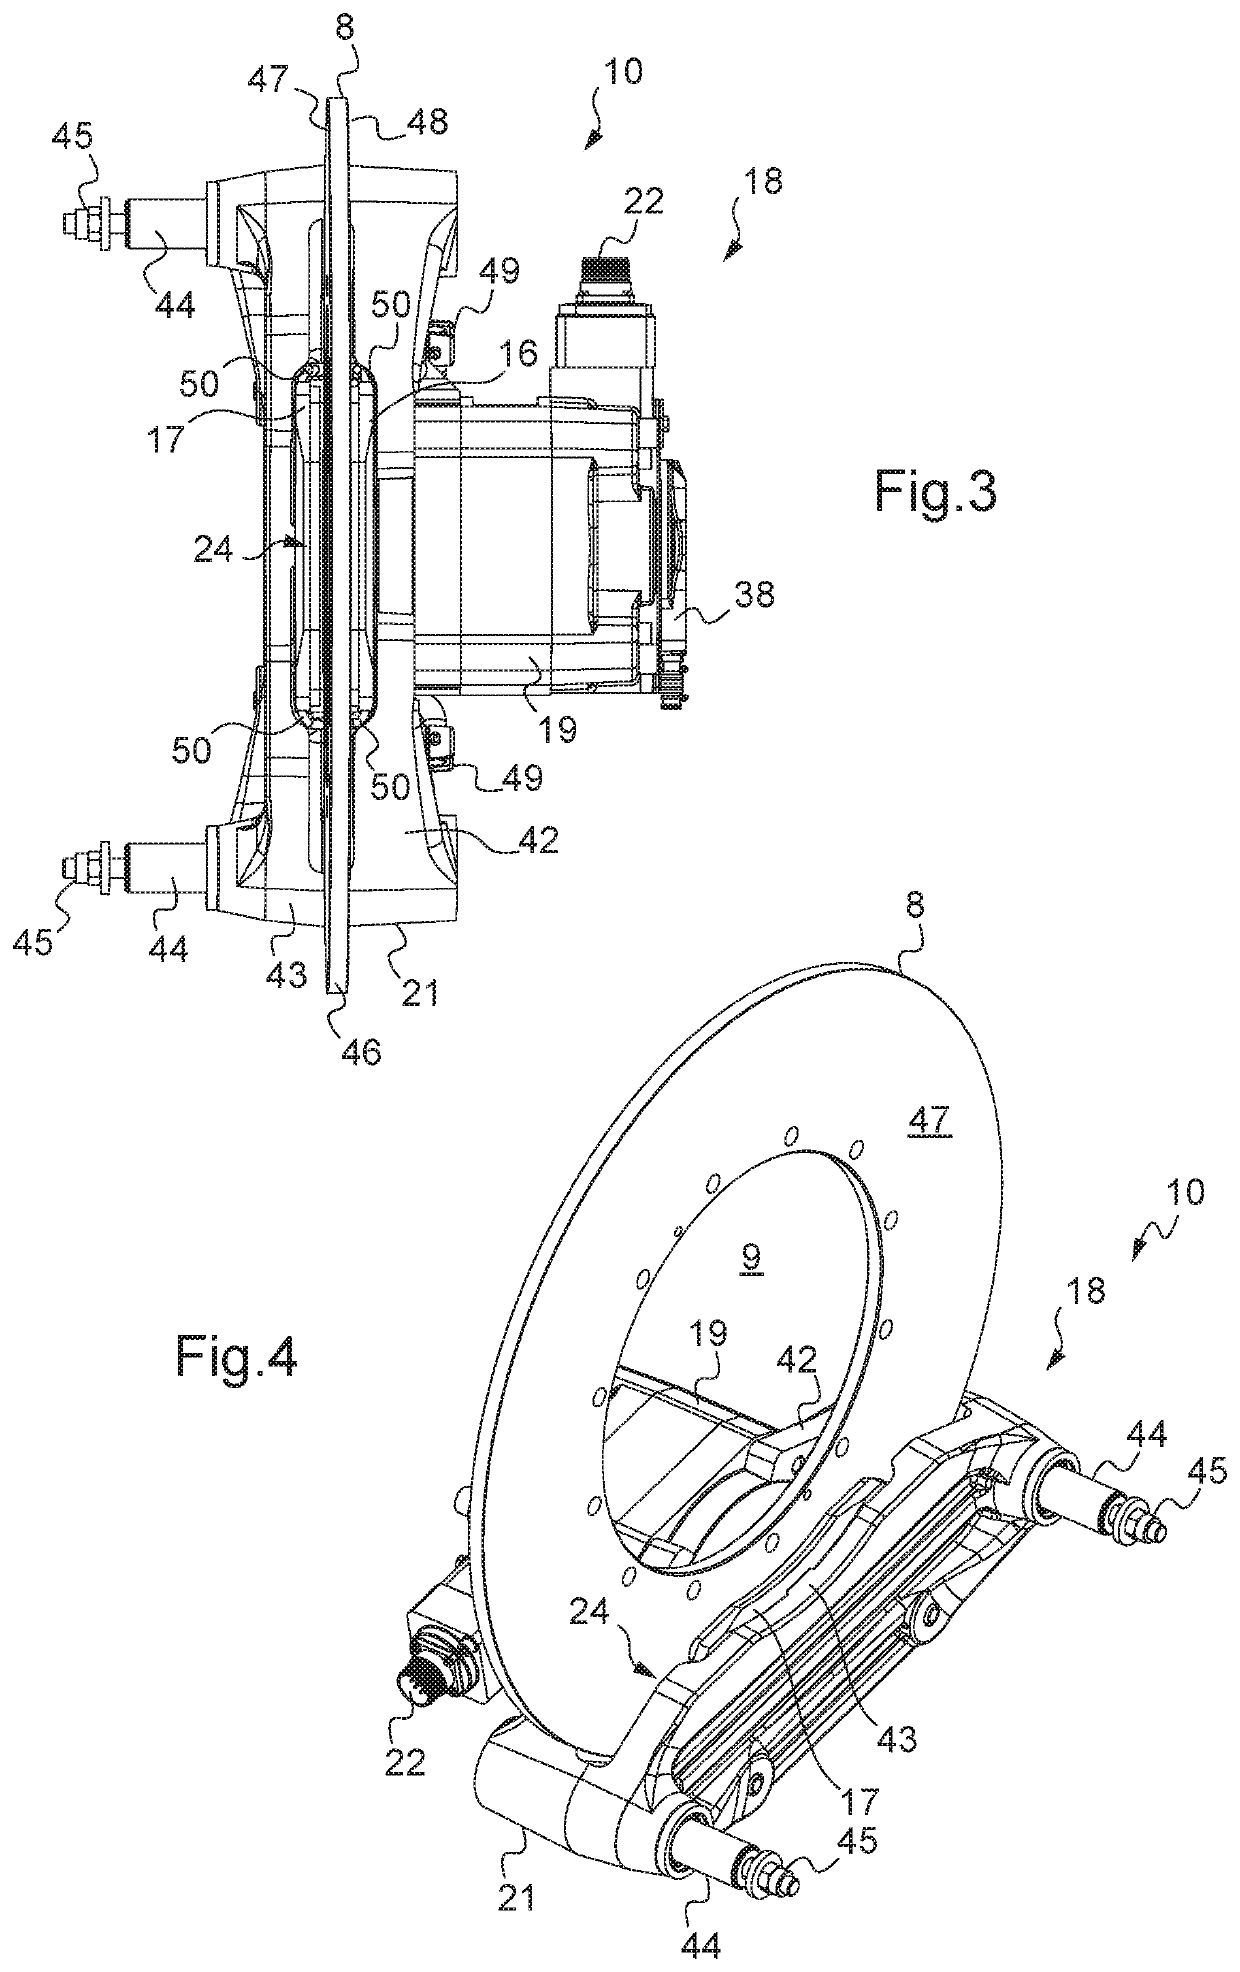 Railway brake system for a railway vehicle